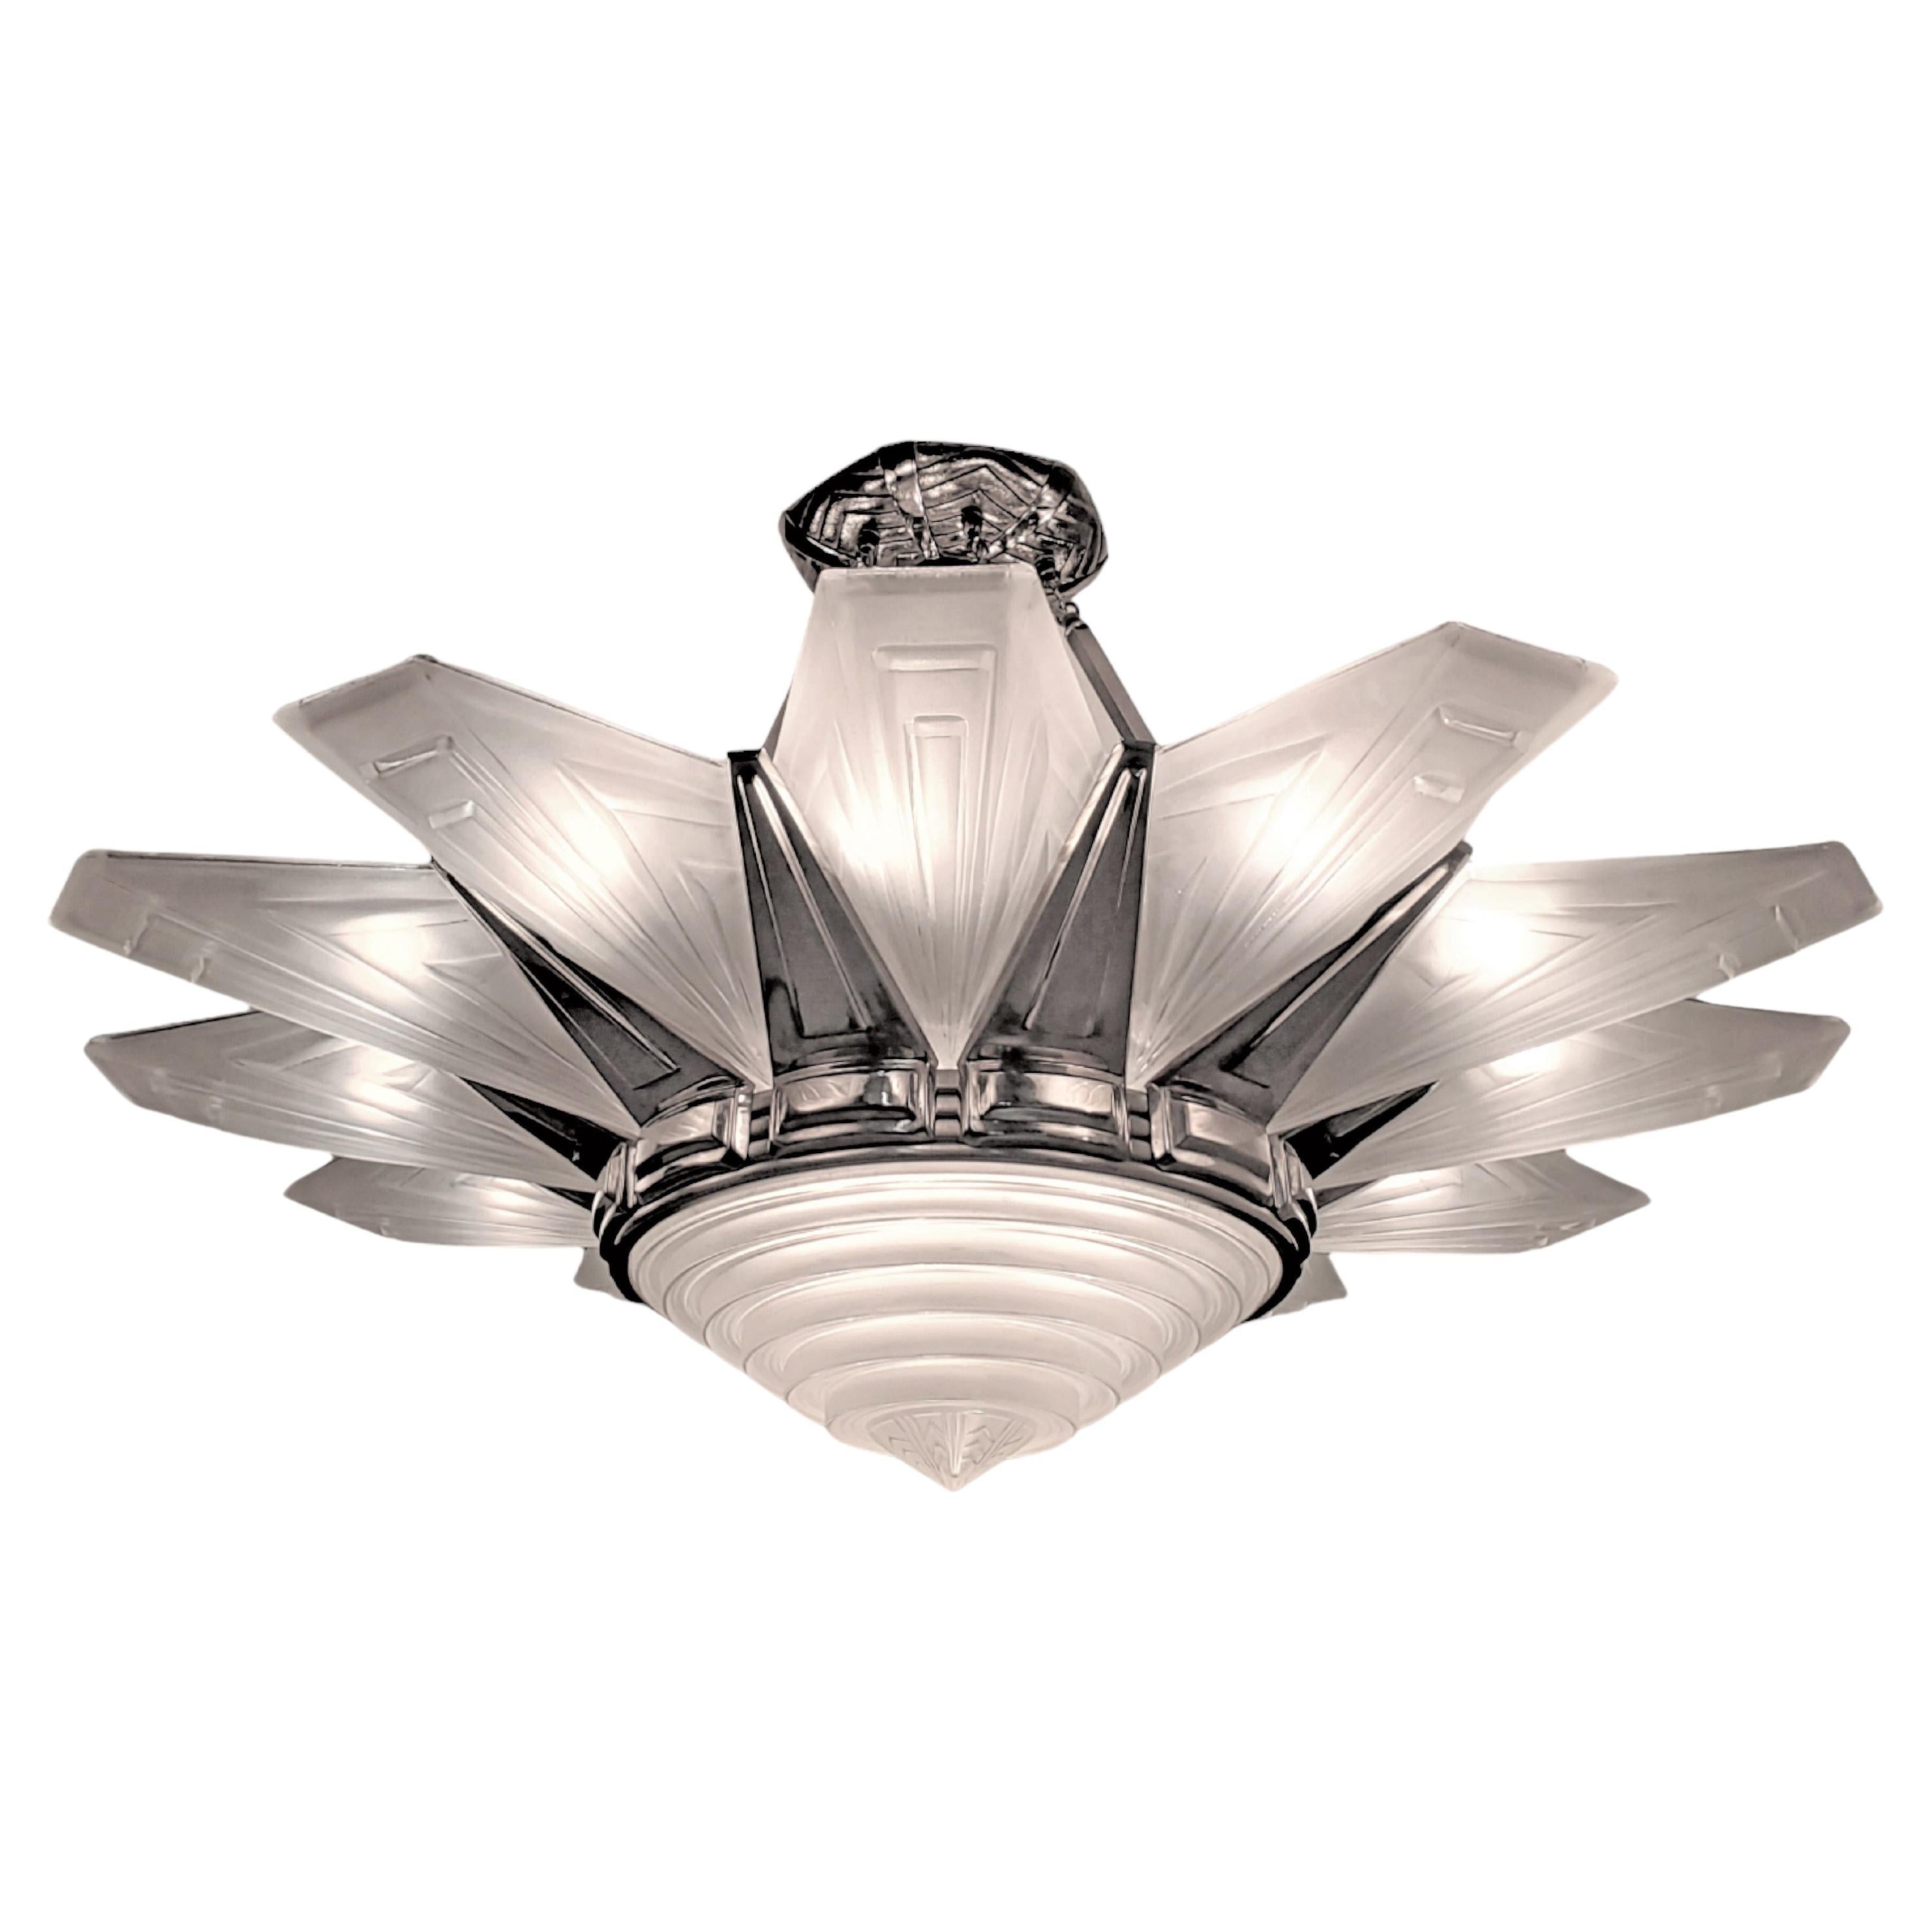 Palatial Art Deco starburst 12 panel frosted art glass and nickel chandelier 